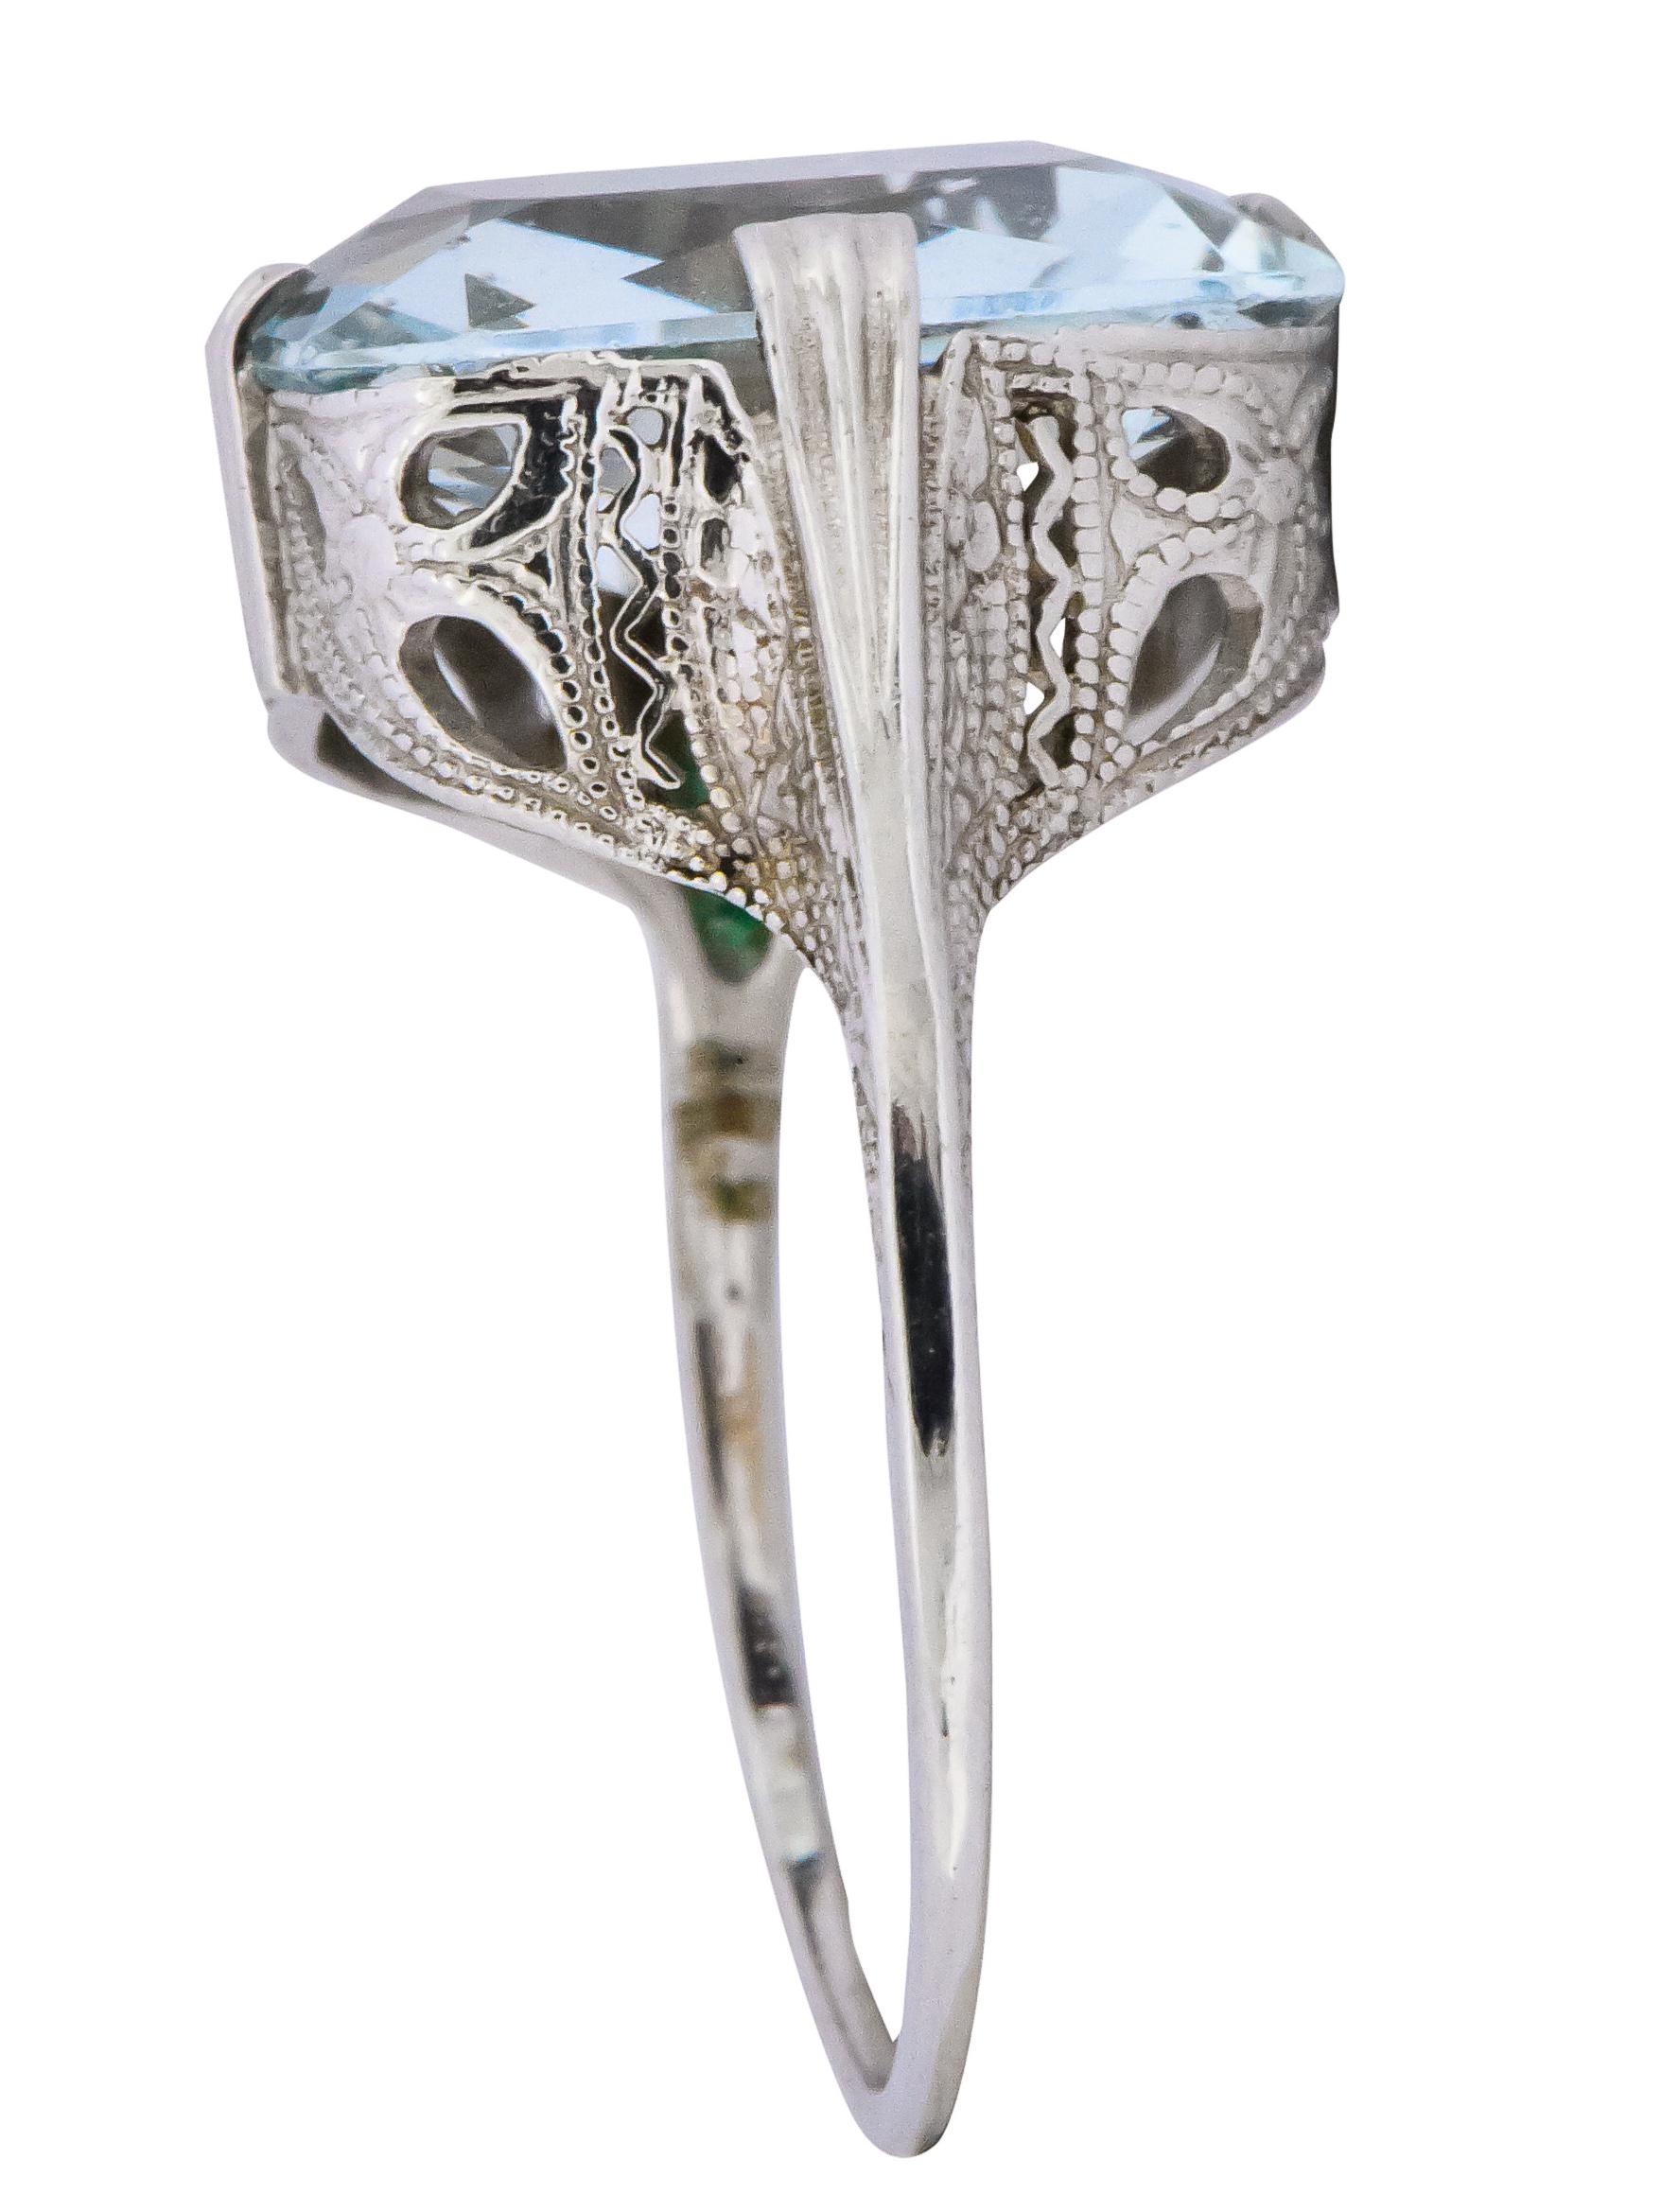 Centering a rectangular scissor cut aquamarine weighing approximately 4.00 carats

The aquamarine is a lovely light very slight greenish blue color

In a North, East, South and West style setting

With a beautiful pierced and millegrain